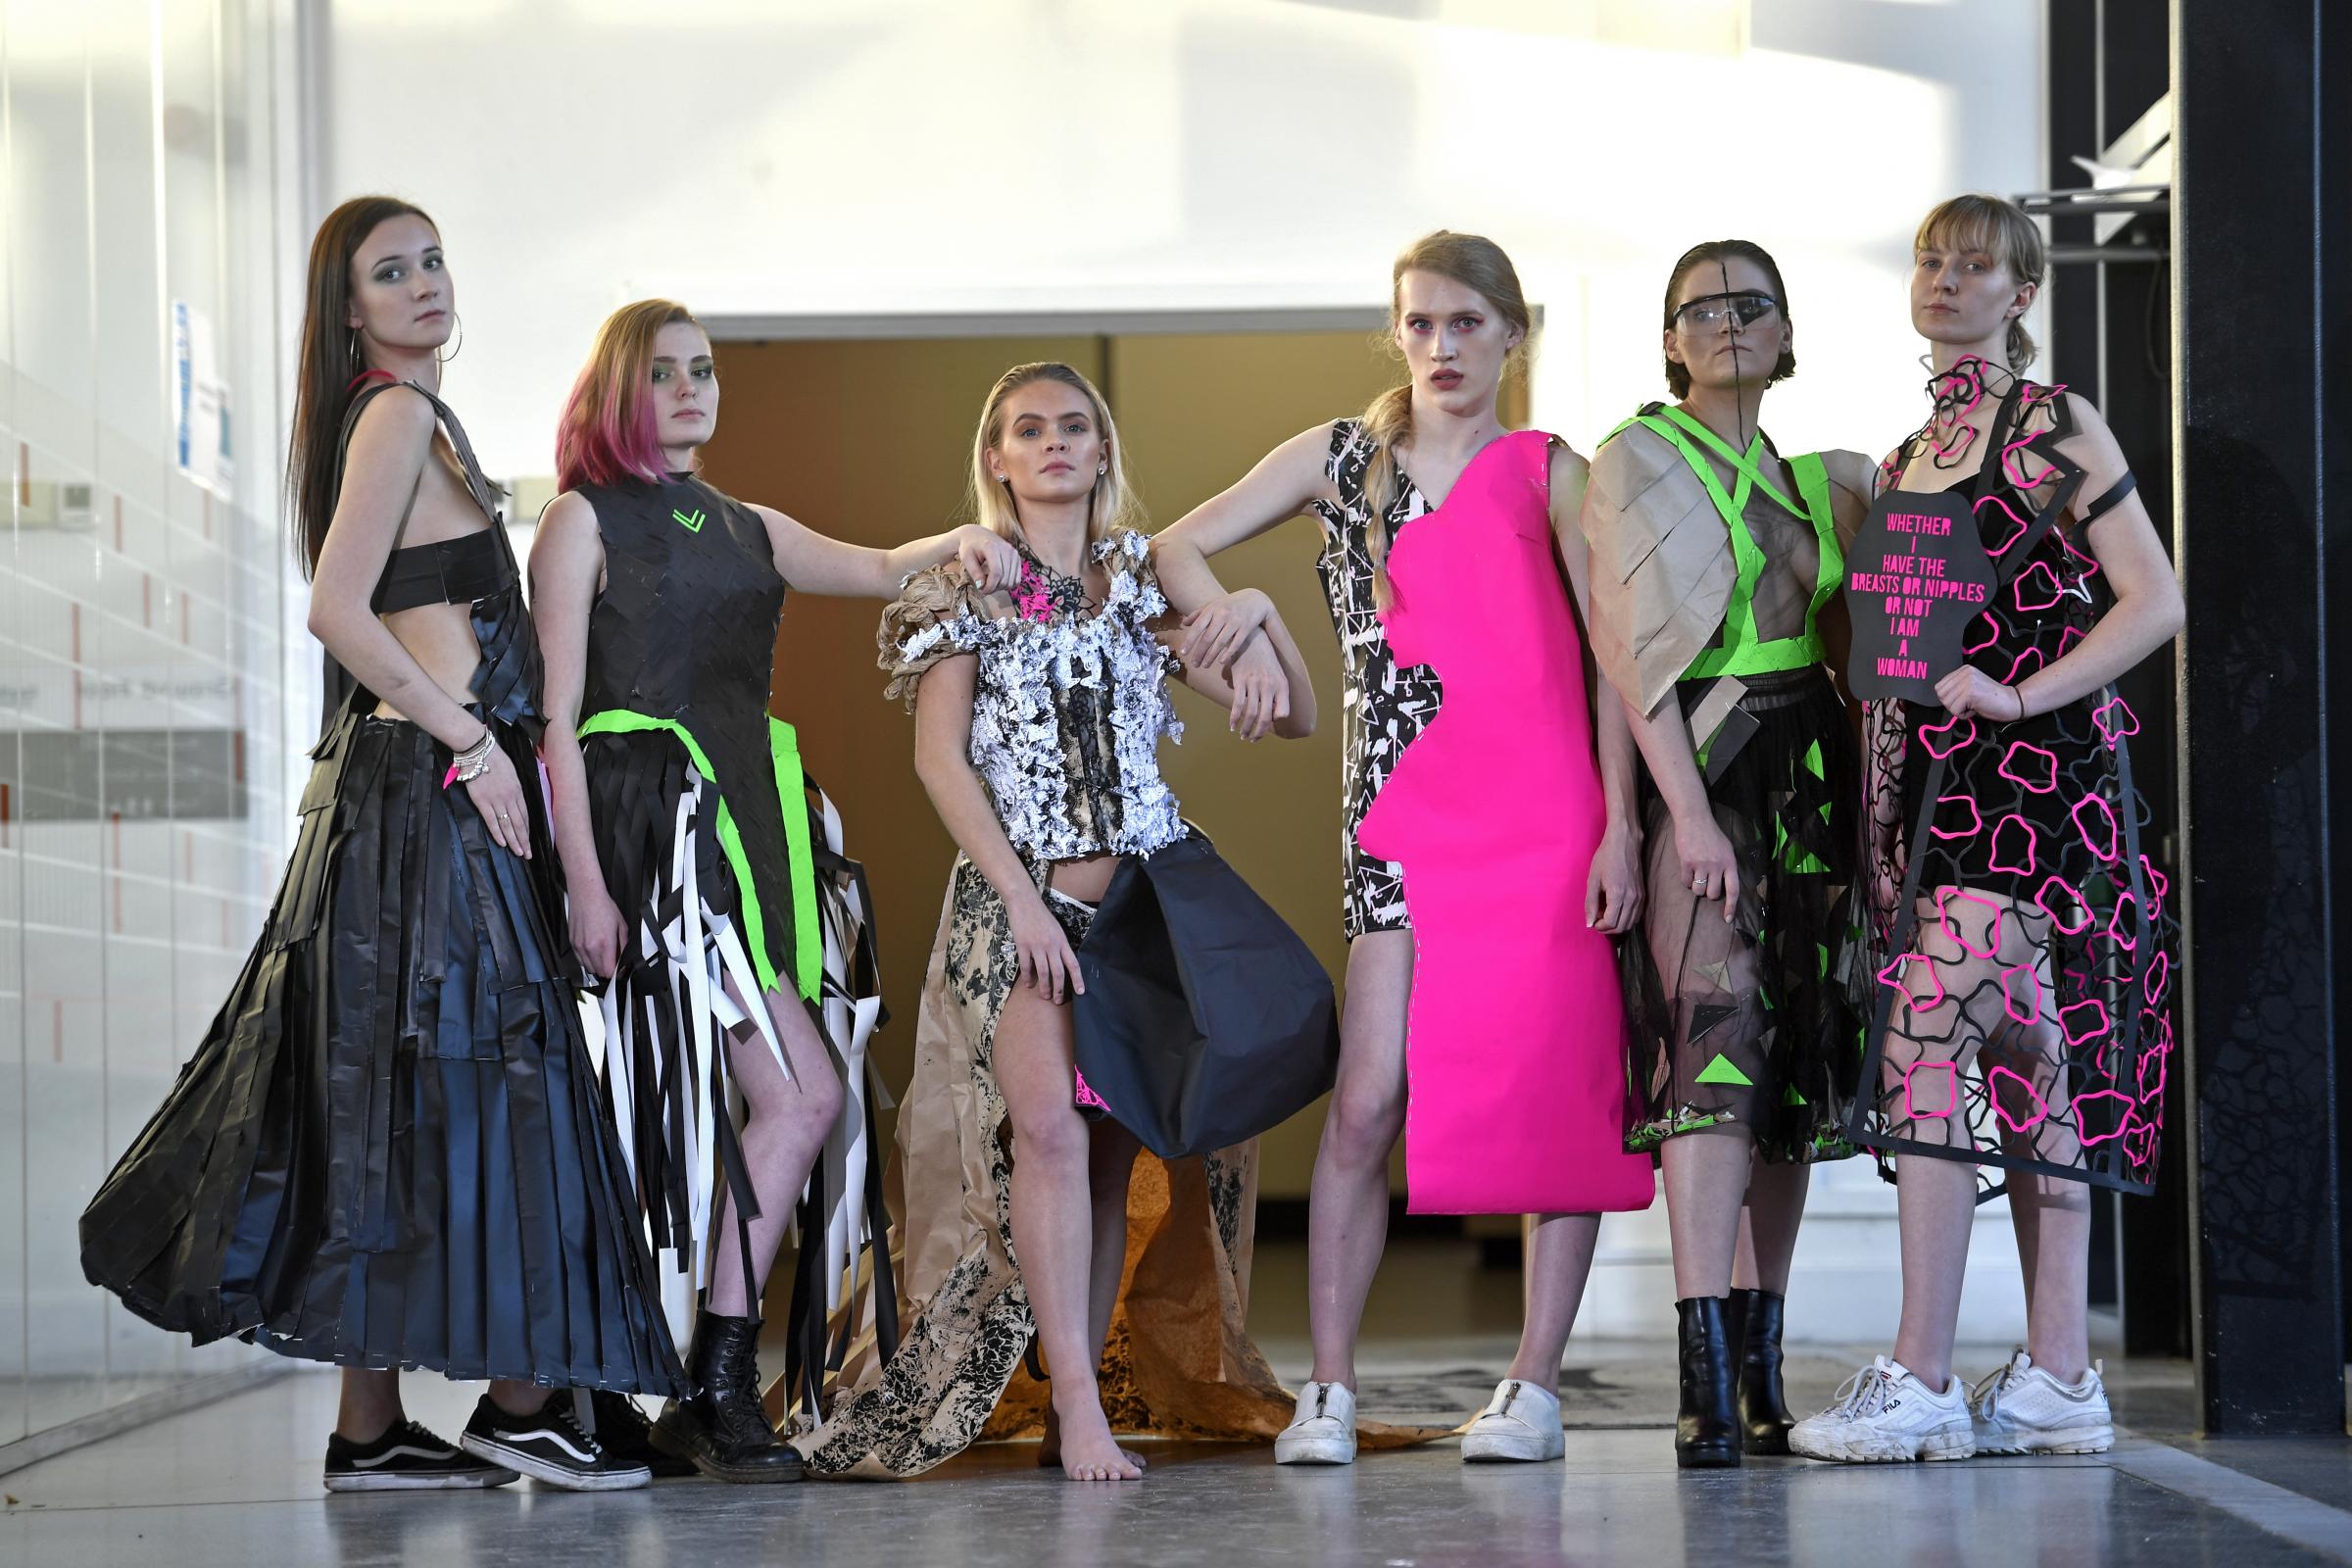 Carlisle College fashion students are inspired by science - News & Star